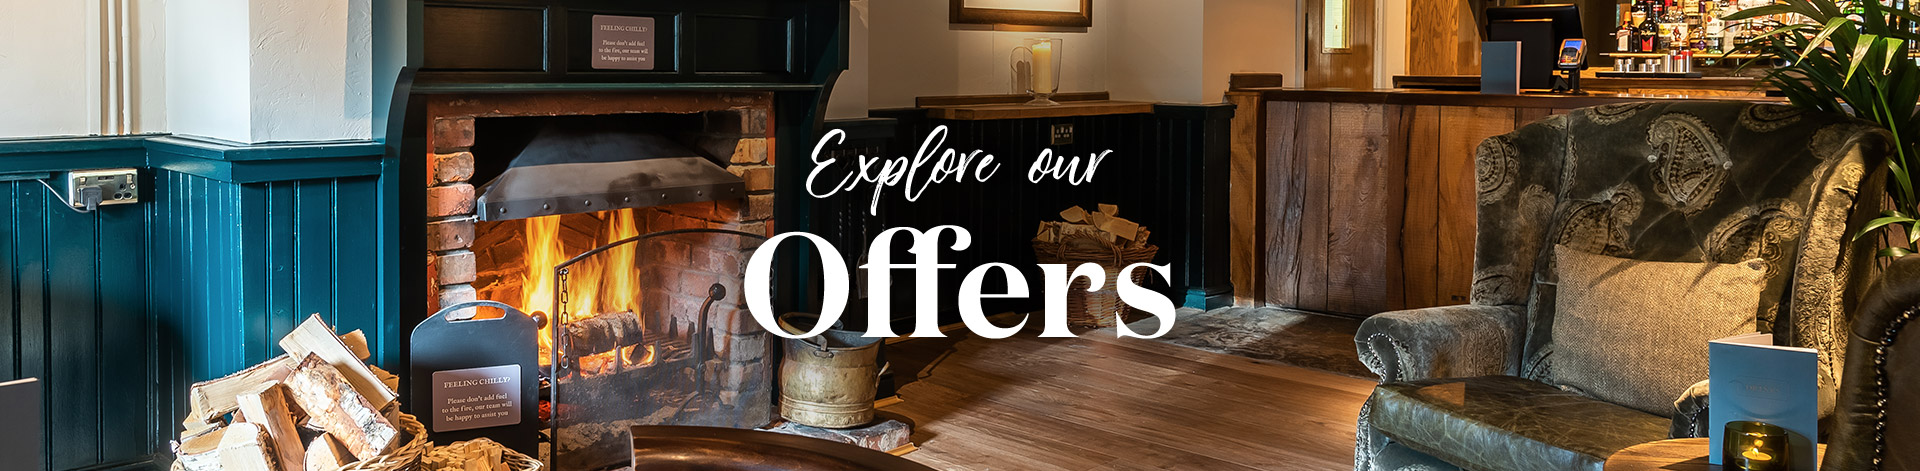 Our latest offers at The Cow and Calf